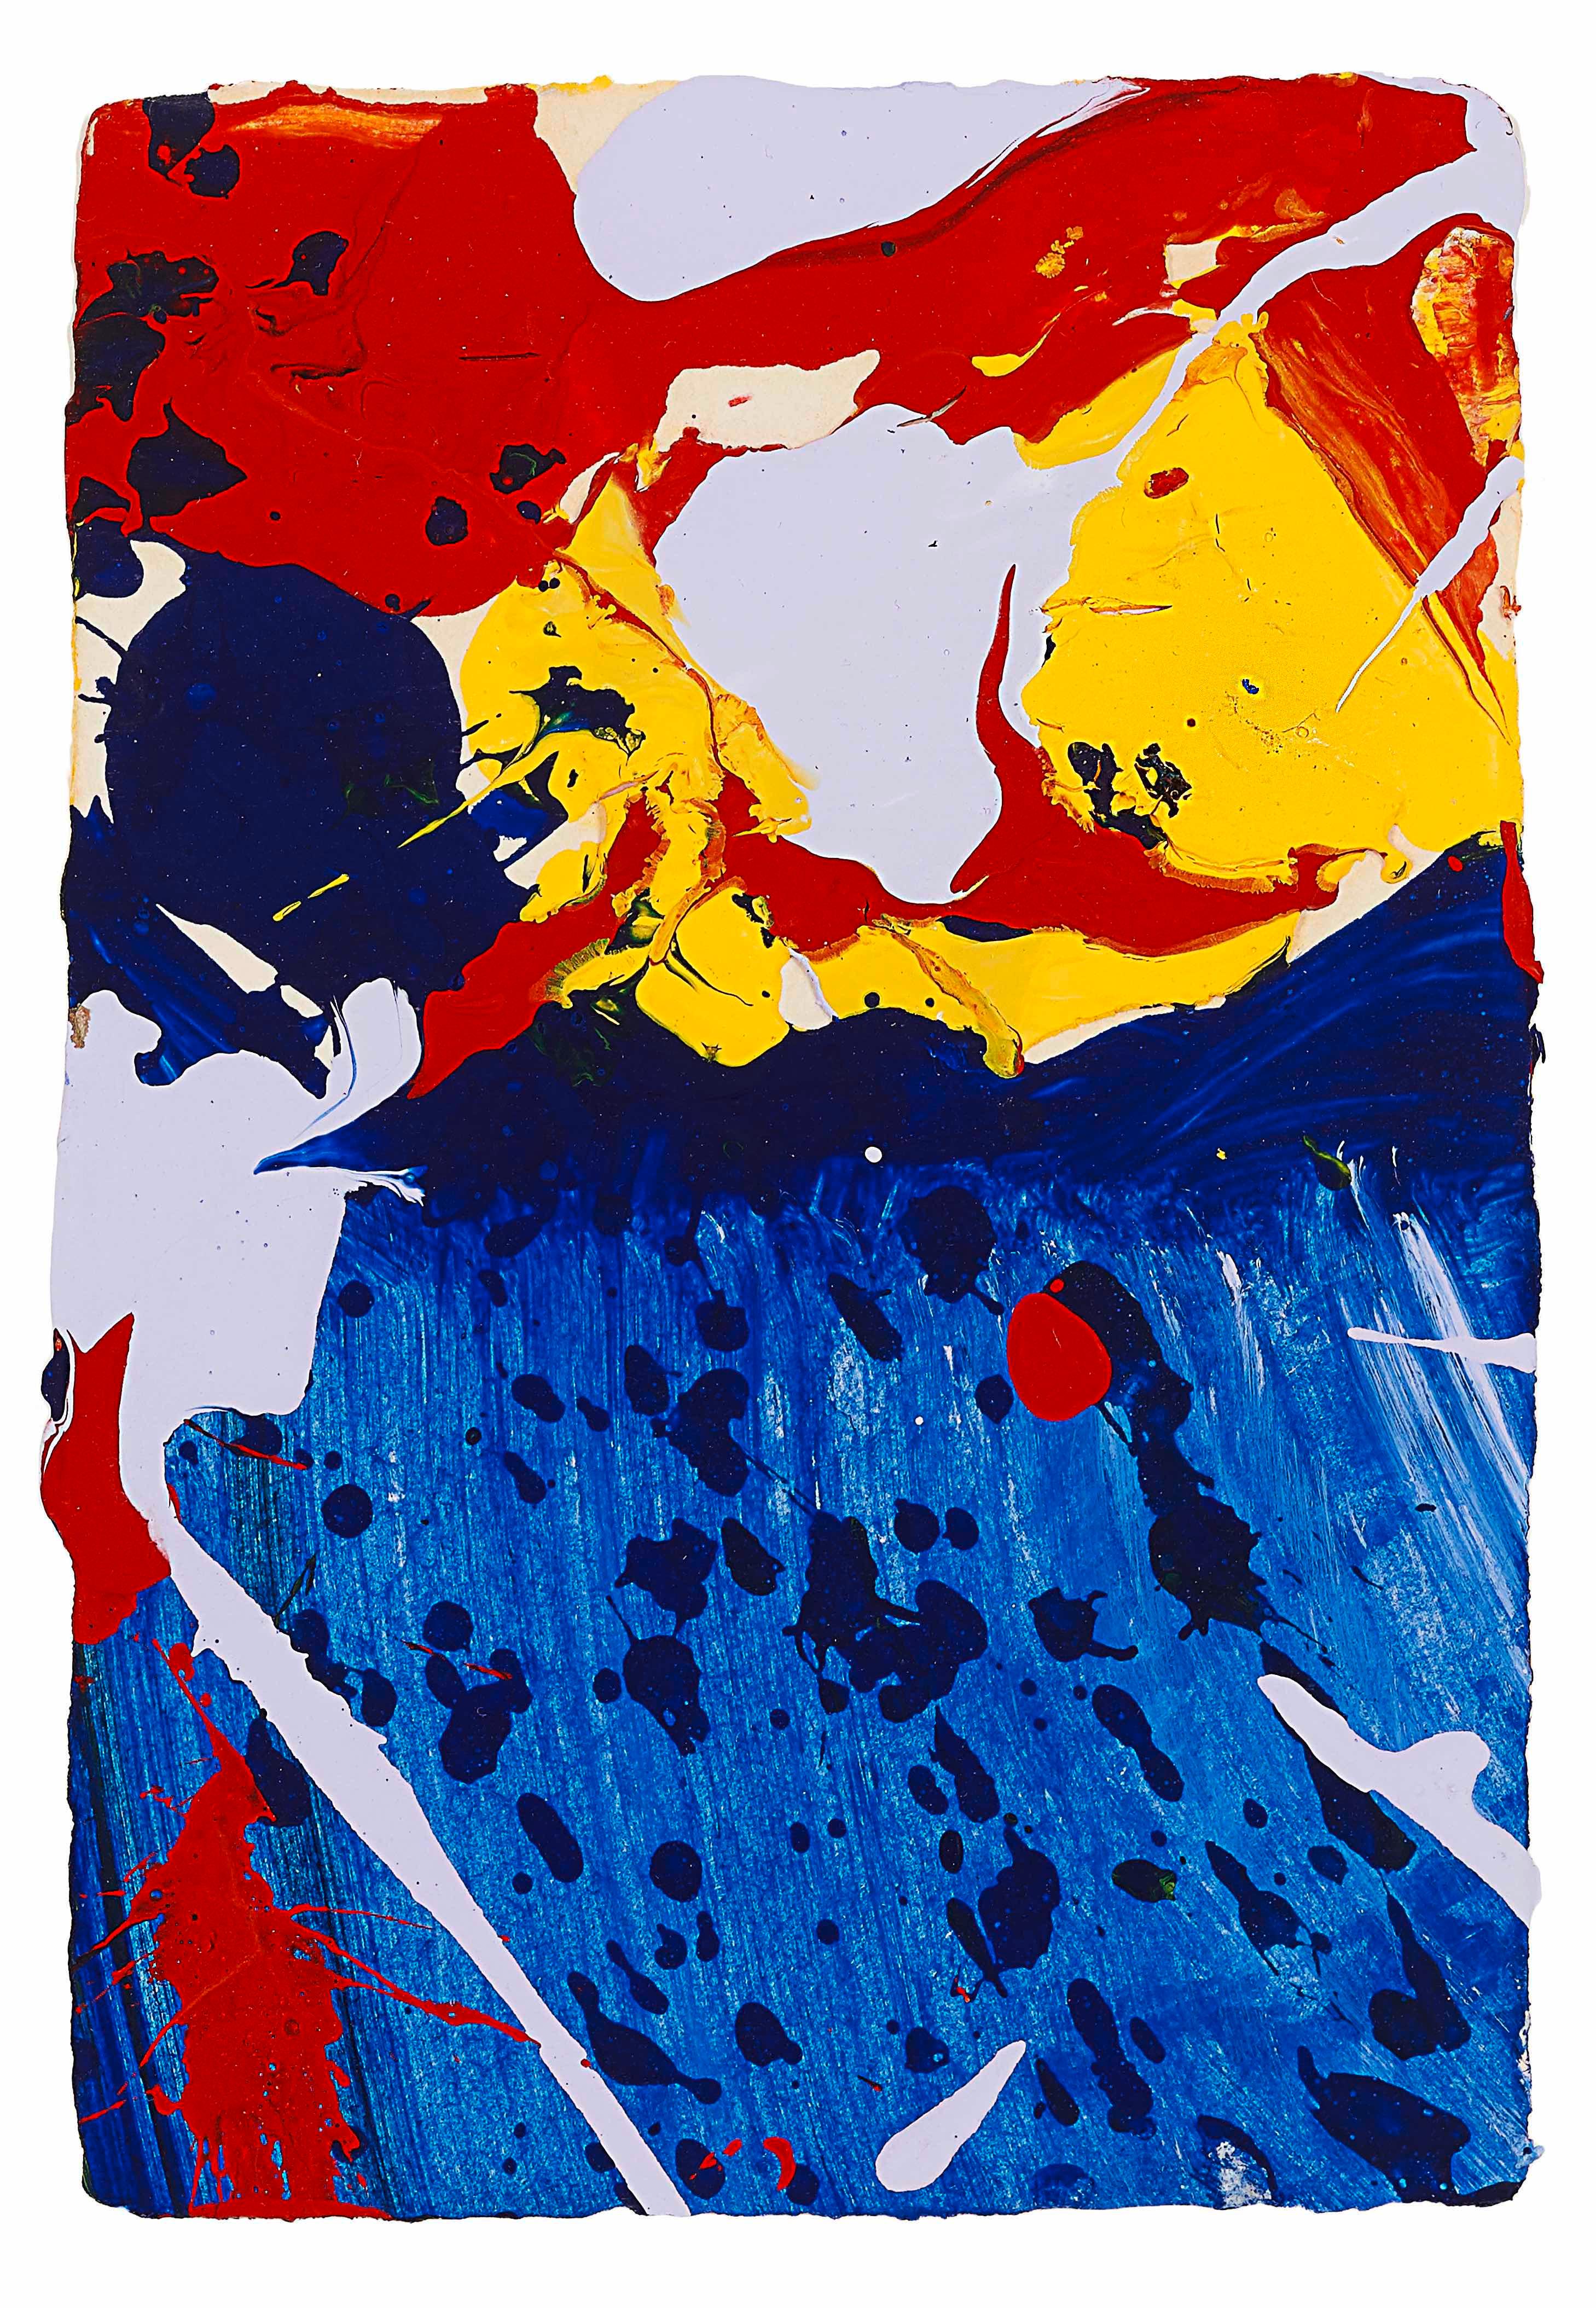 *UK BUYERS WILL PAY AN ADDITIONAL 5% IMPORT DUTY ON TOP OF THE ABOVE PRICE

Sklye by Sam Francis (1923-1994)
Acrylic on paper
14.6 x 10.2 cm (5 ³/₄ x 4 inches)
Signed, Sam Francis and dated on the reverse
Signed again, dated and inscribed on the